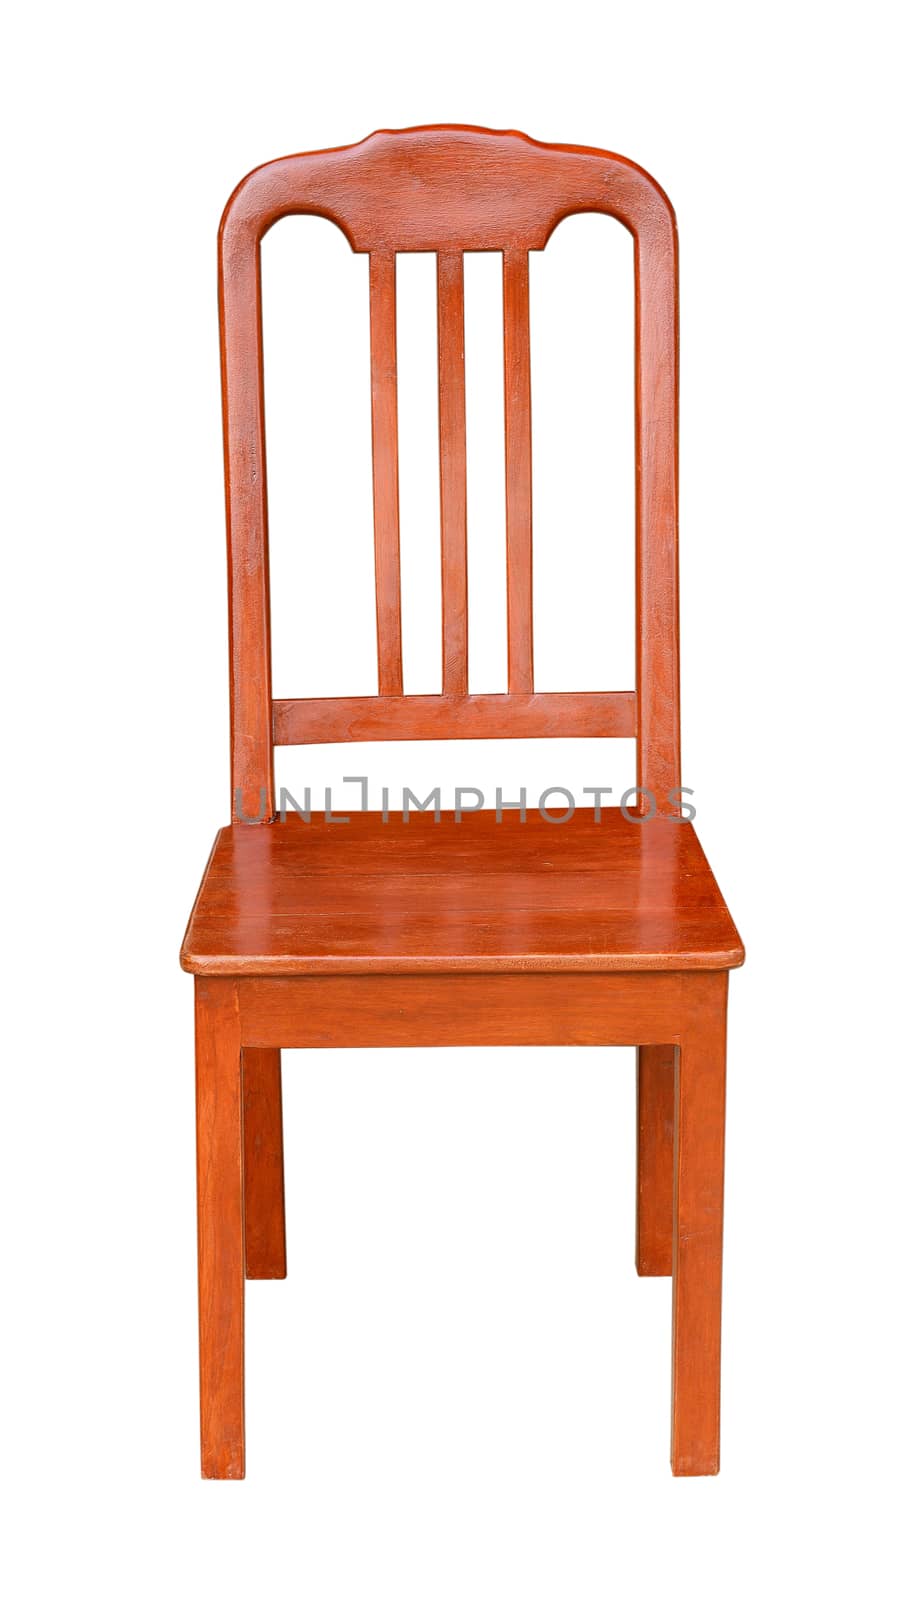 chair on white background